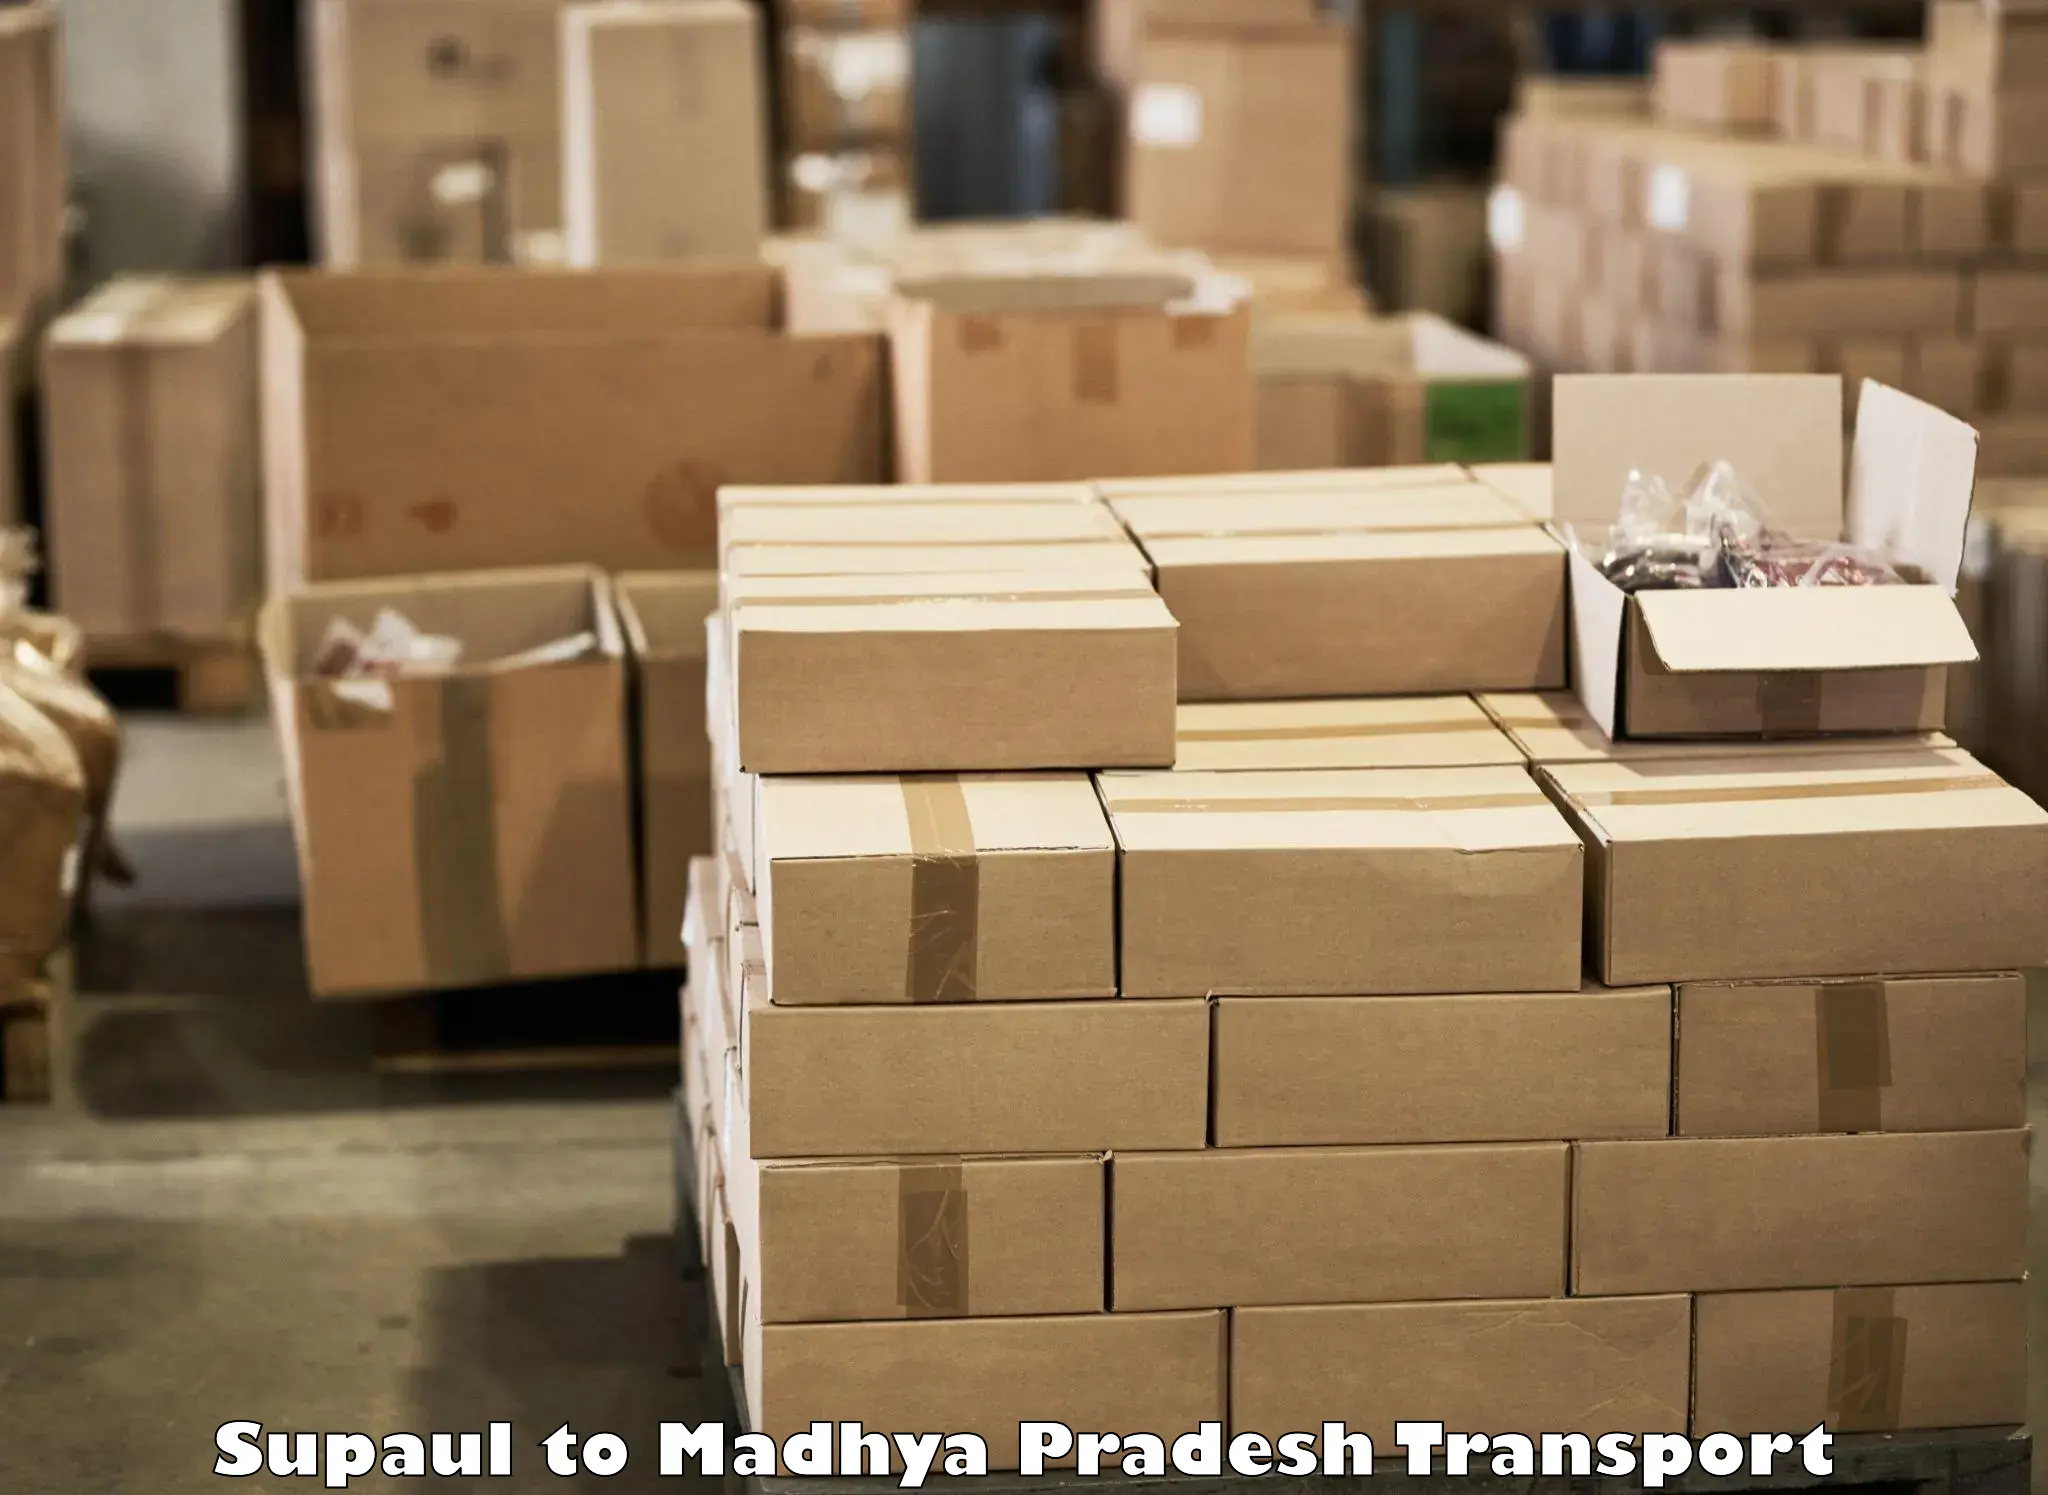 Package delivery services Supaul to Shahpura Dindori